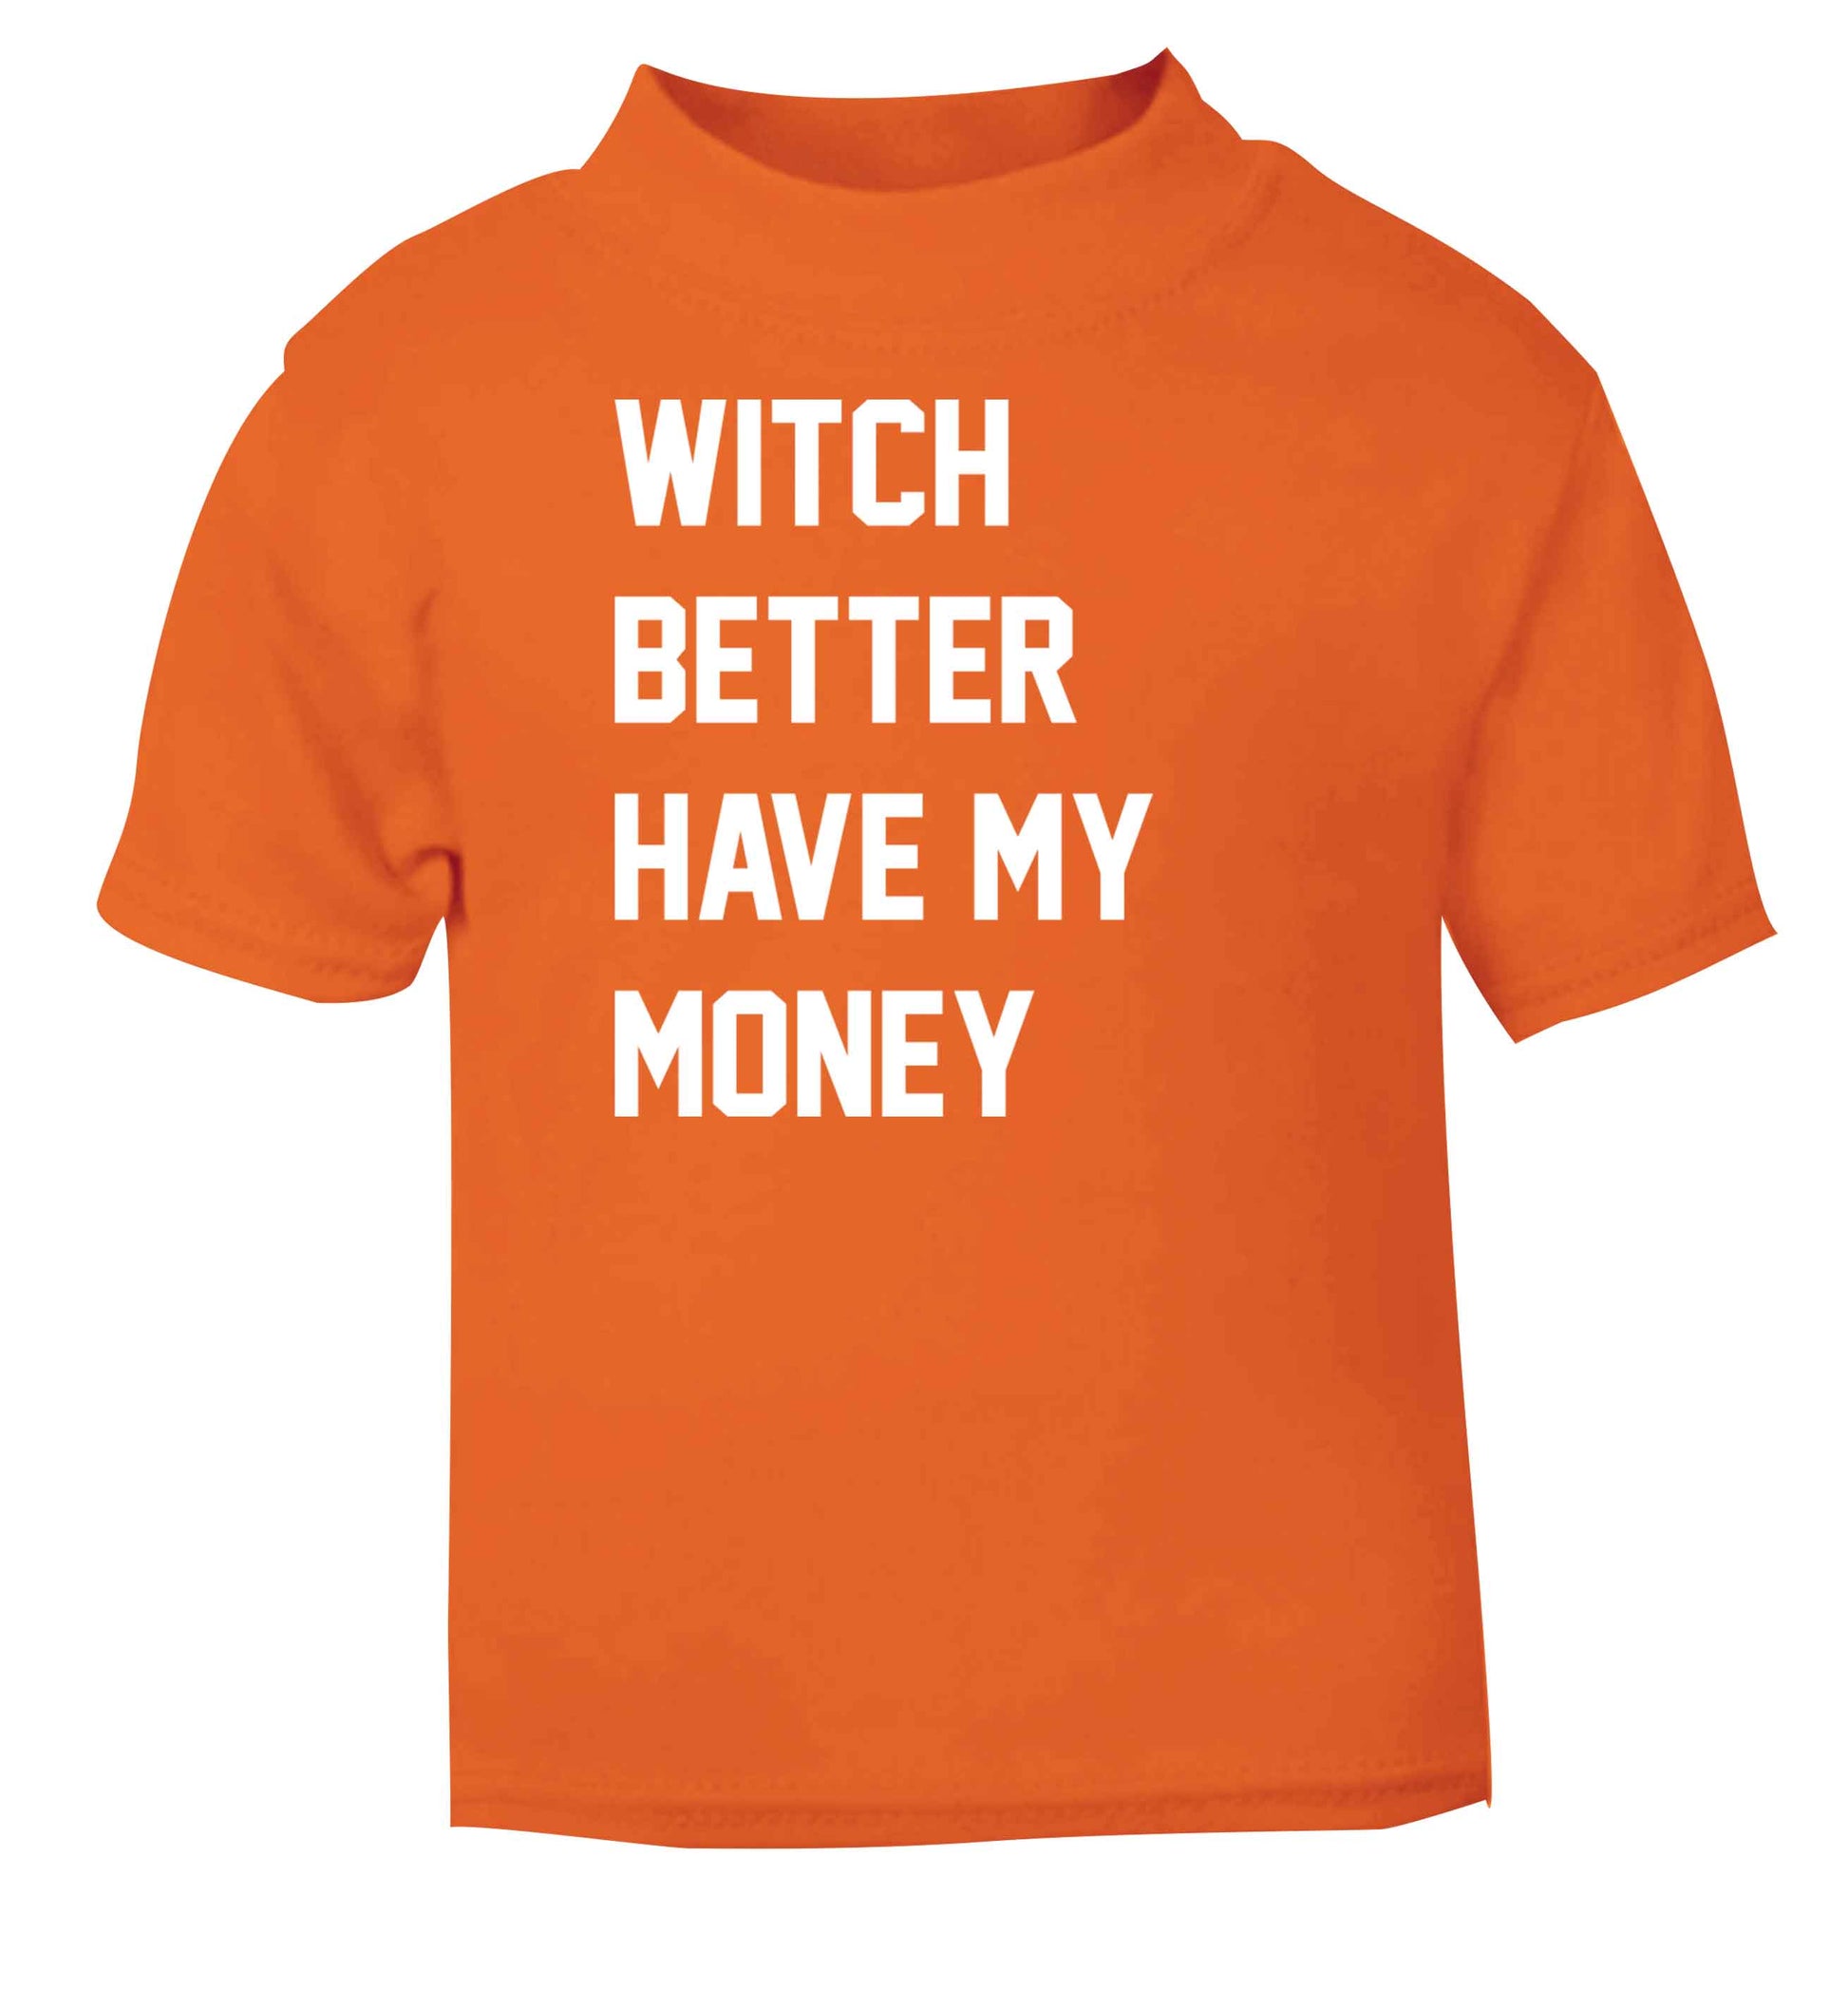 Witch better have my money orange baby toddler Tshirt 2 Years